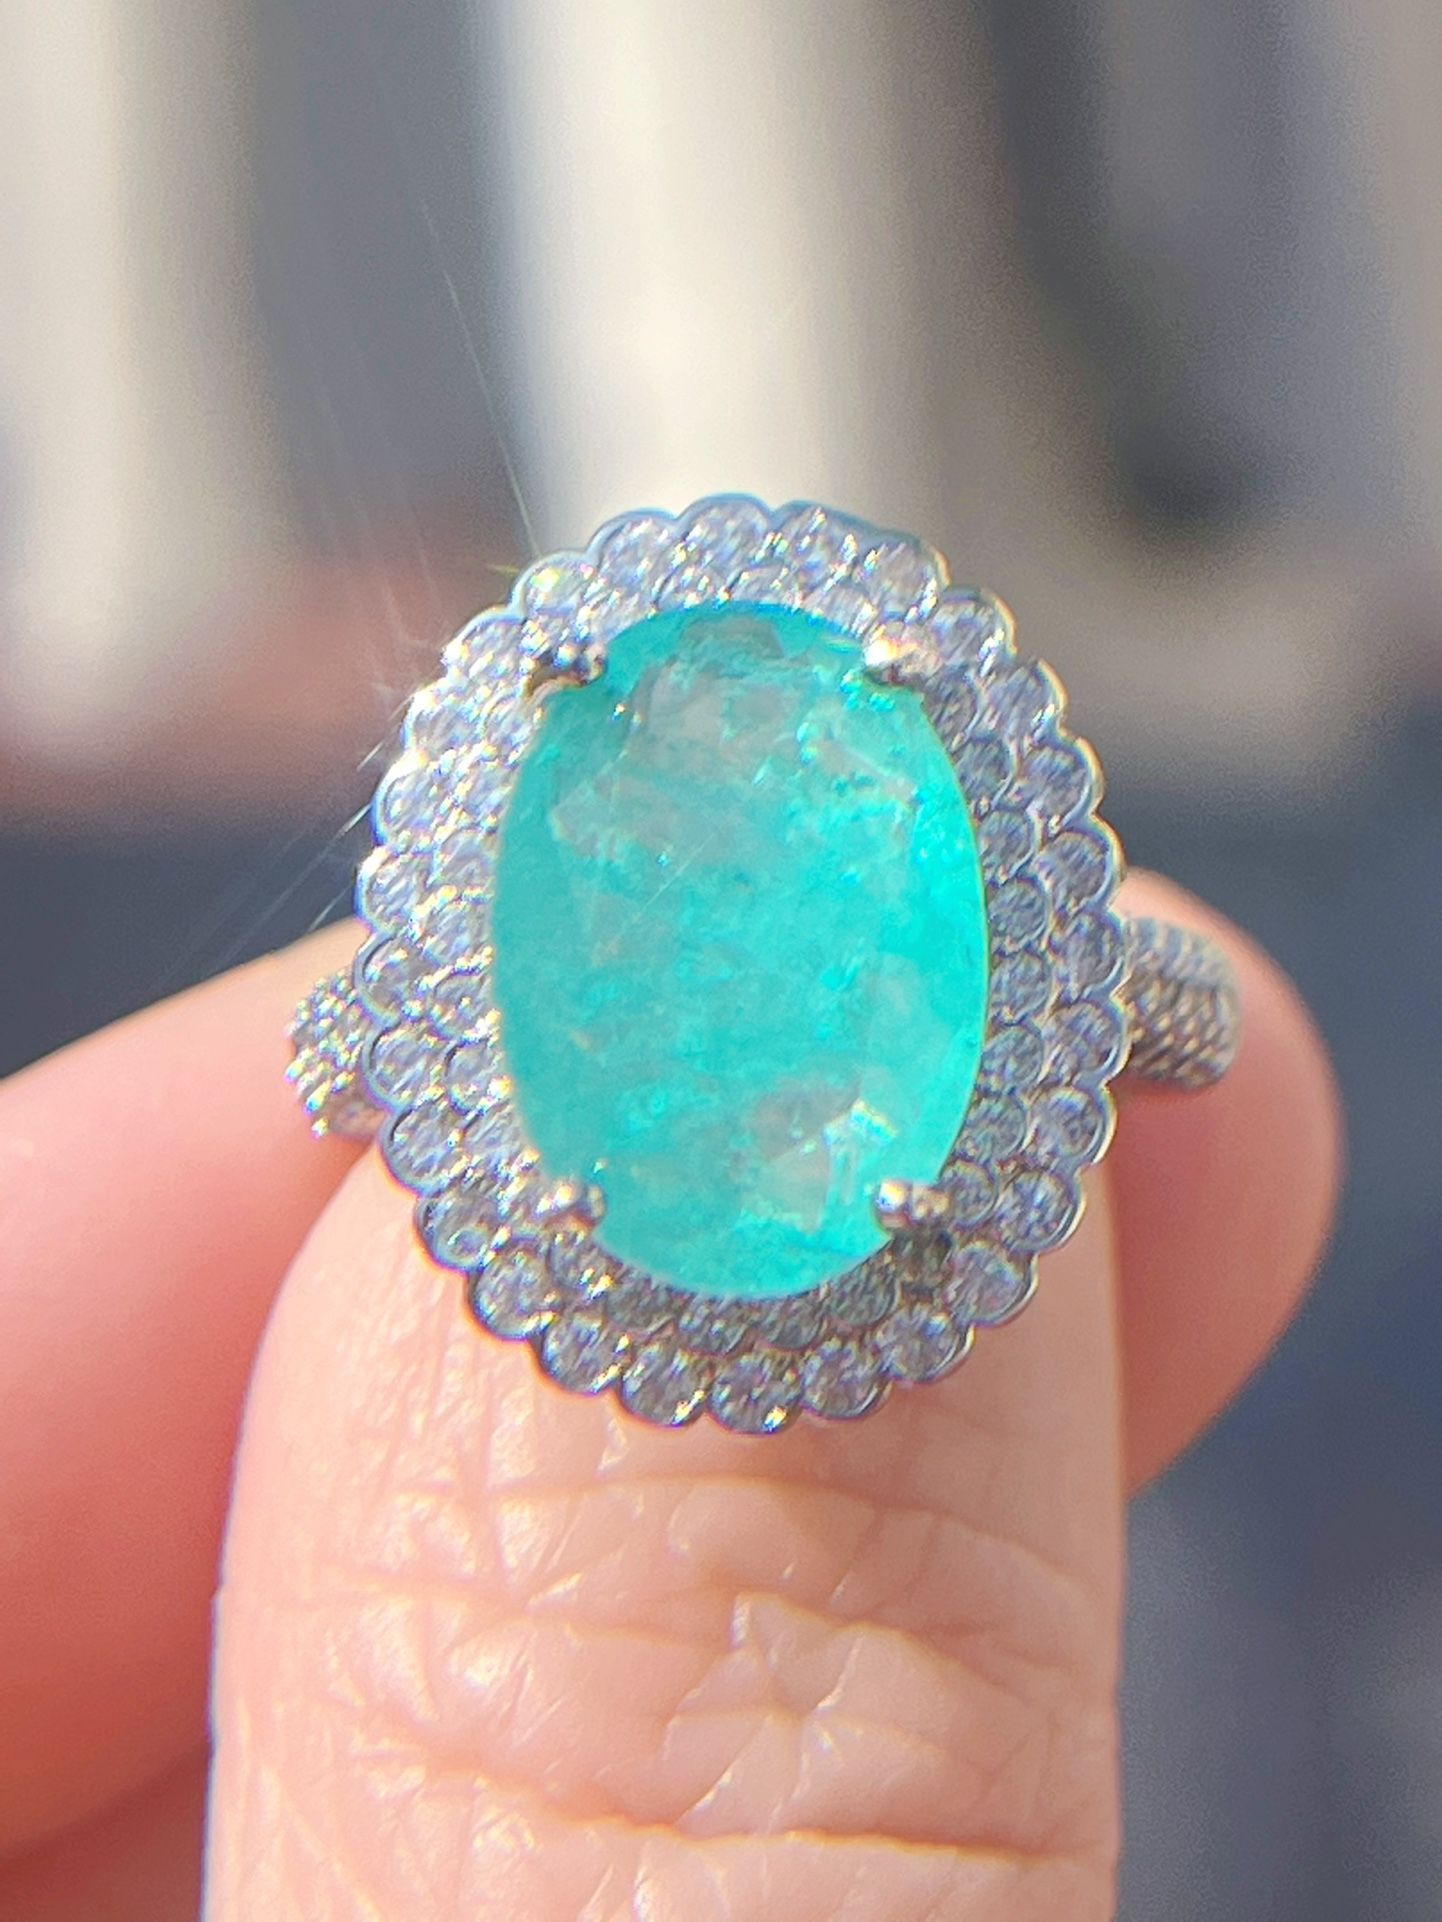 5ct Oval Paraiba Tourmaline Ring- Sterling Silver Engagement Ring